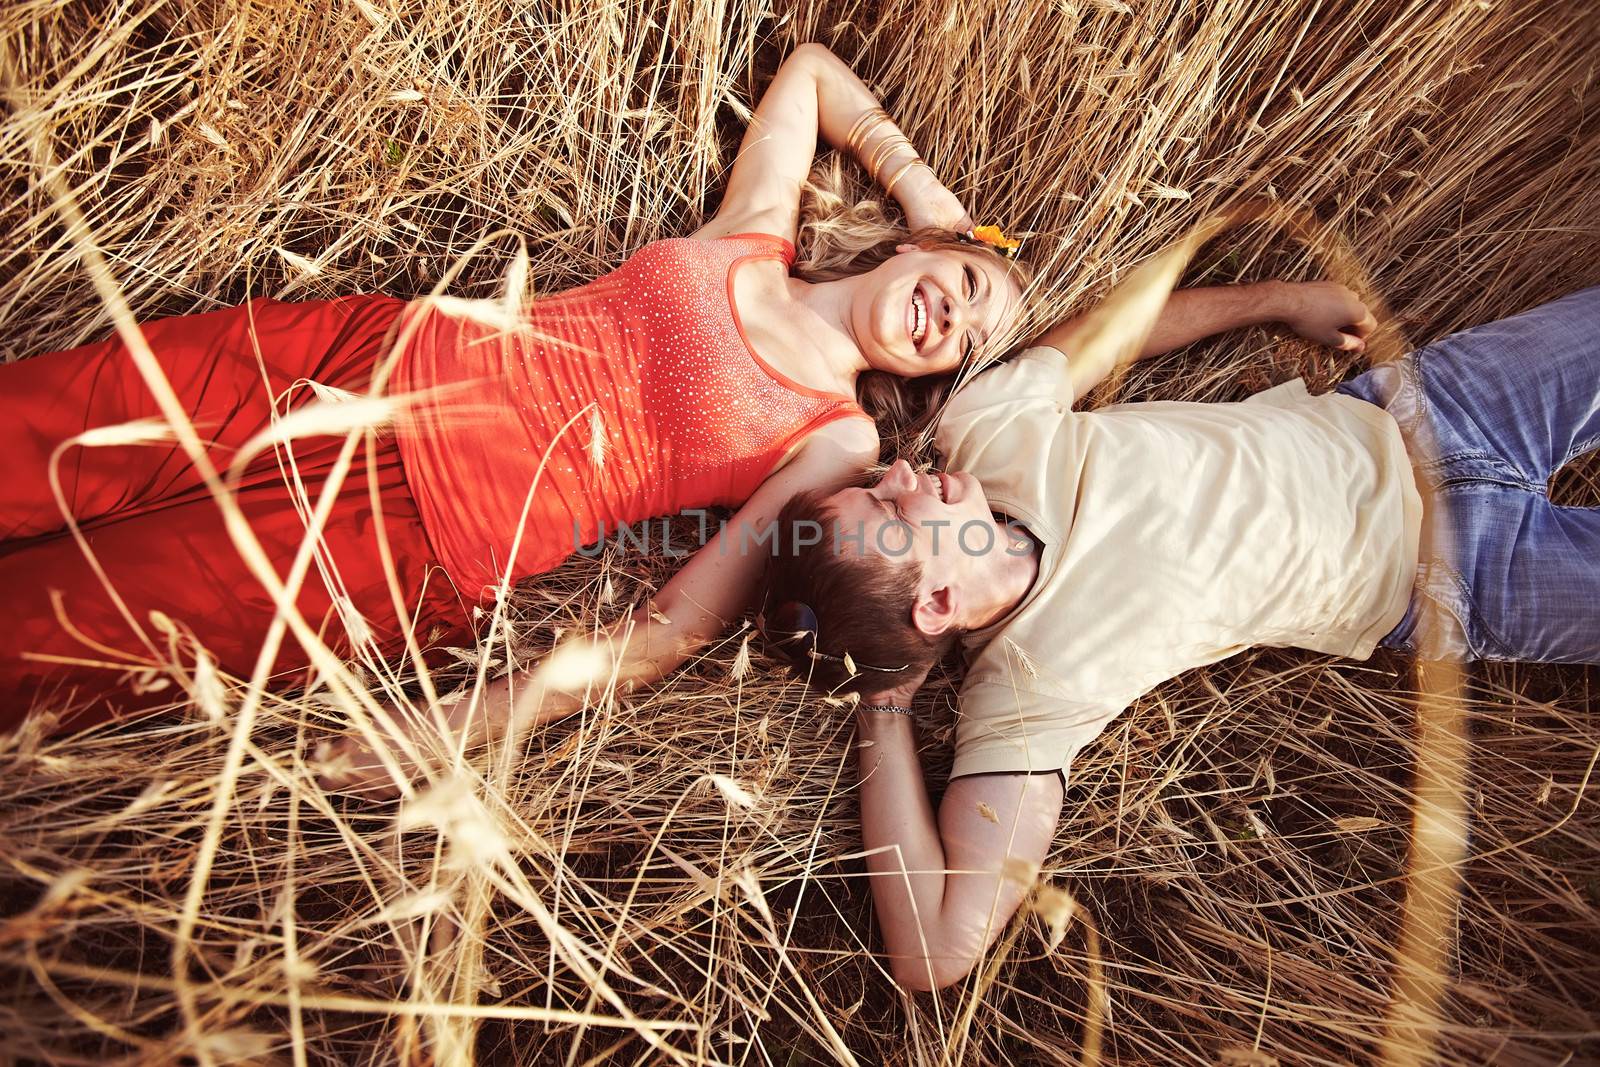 A man and a woman are in a wheat field